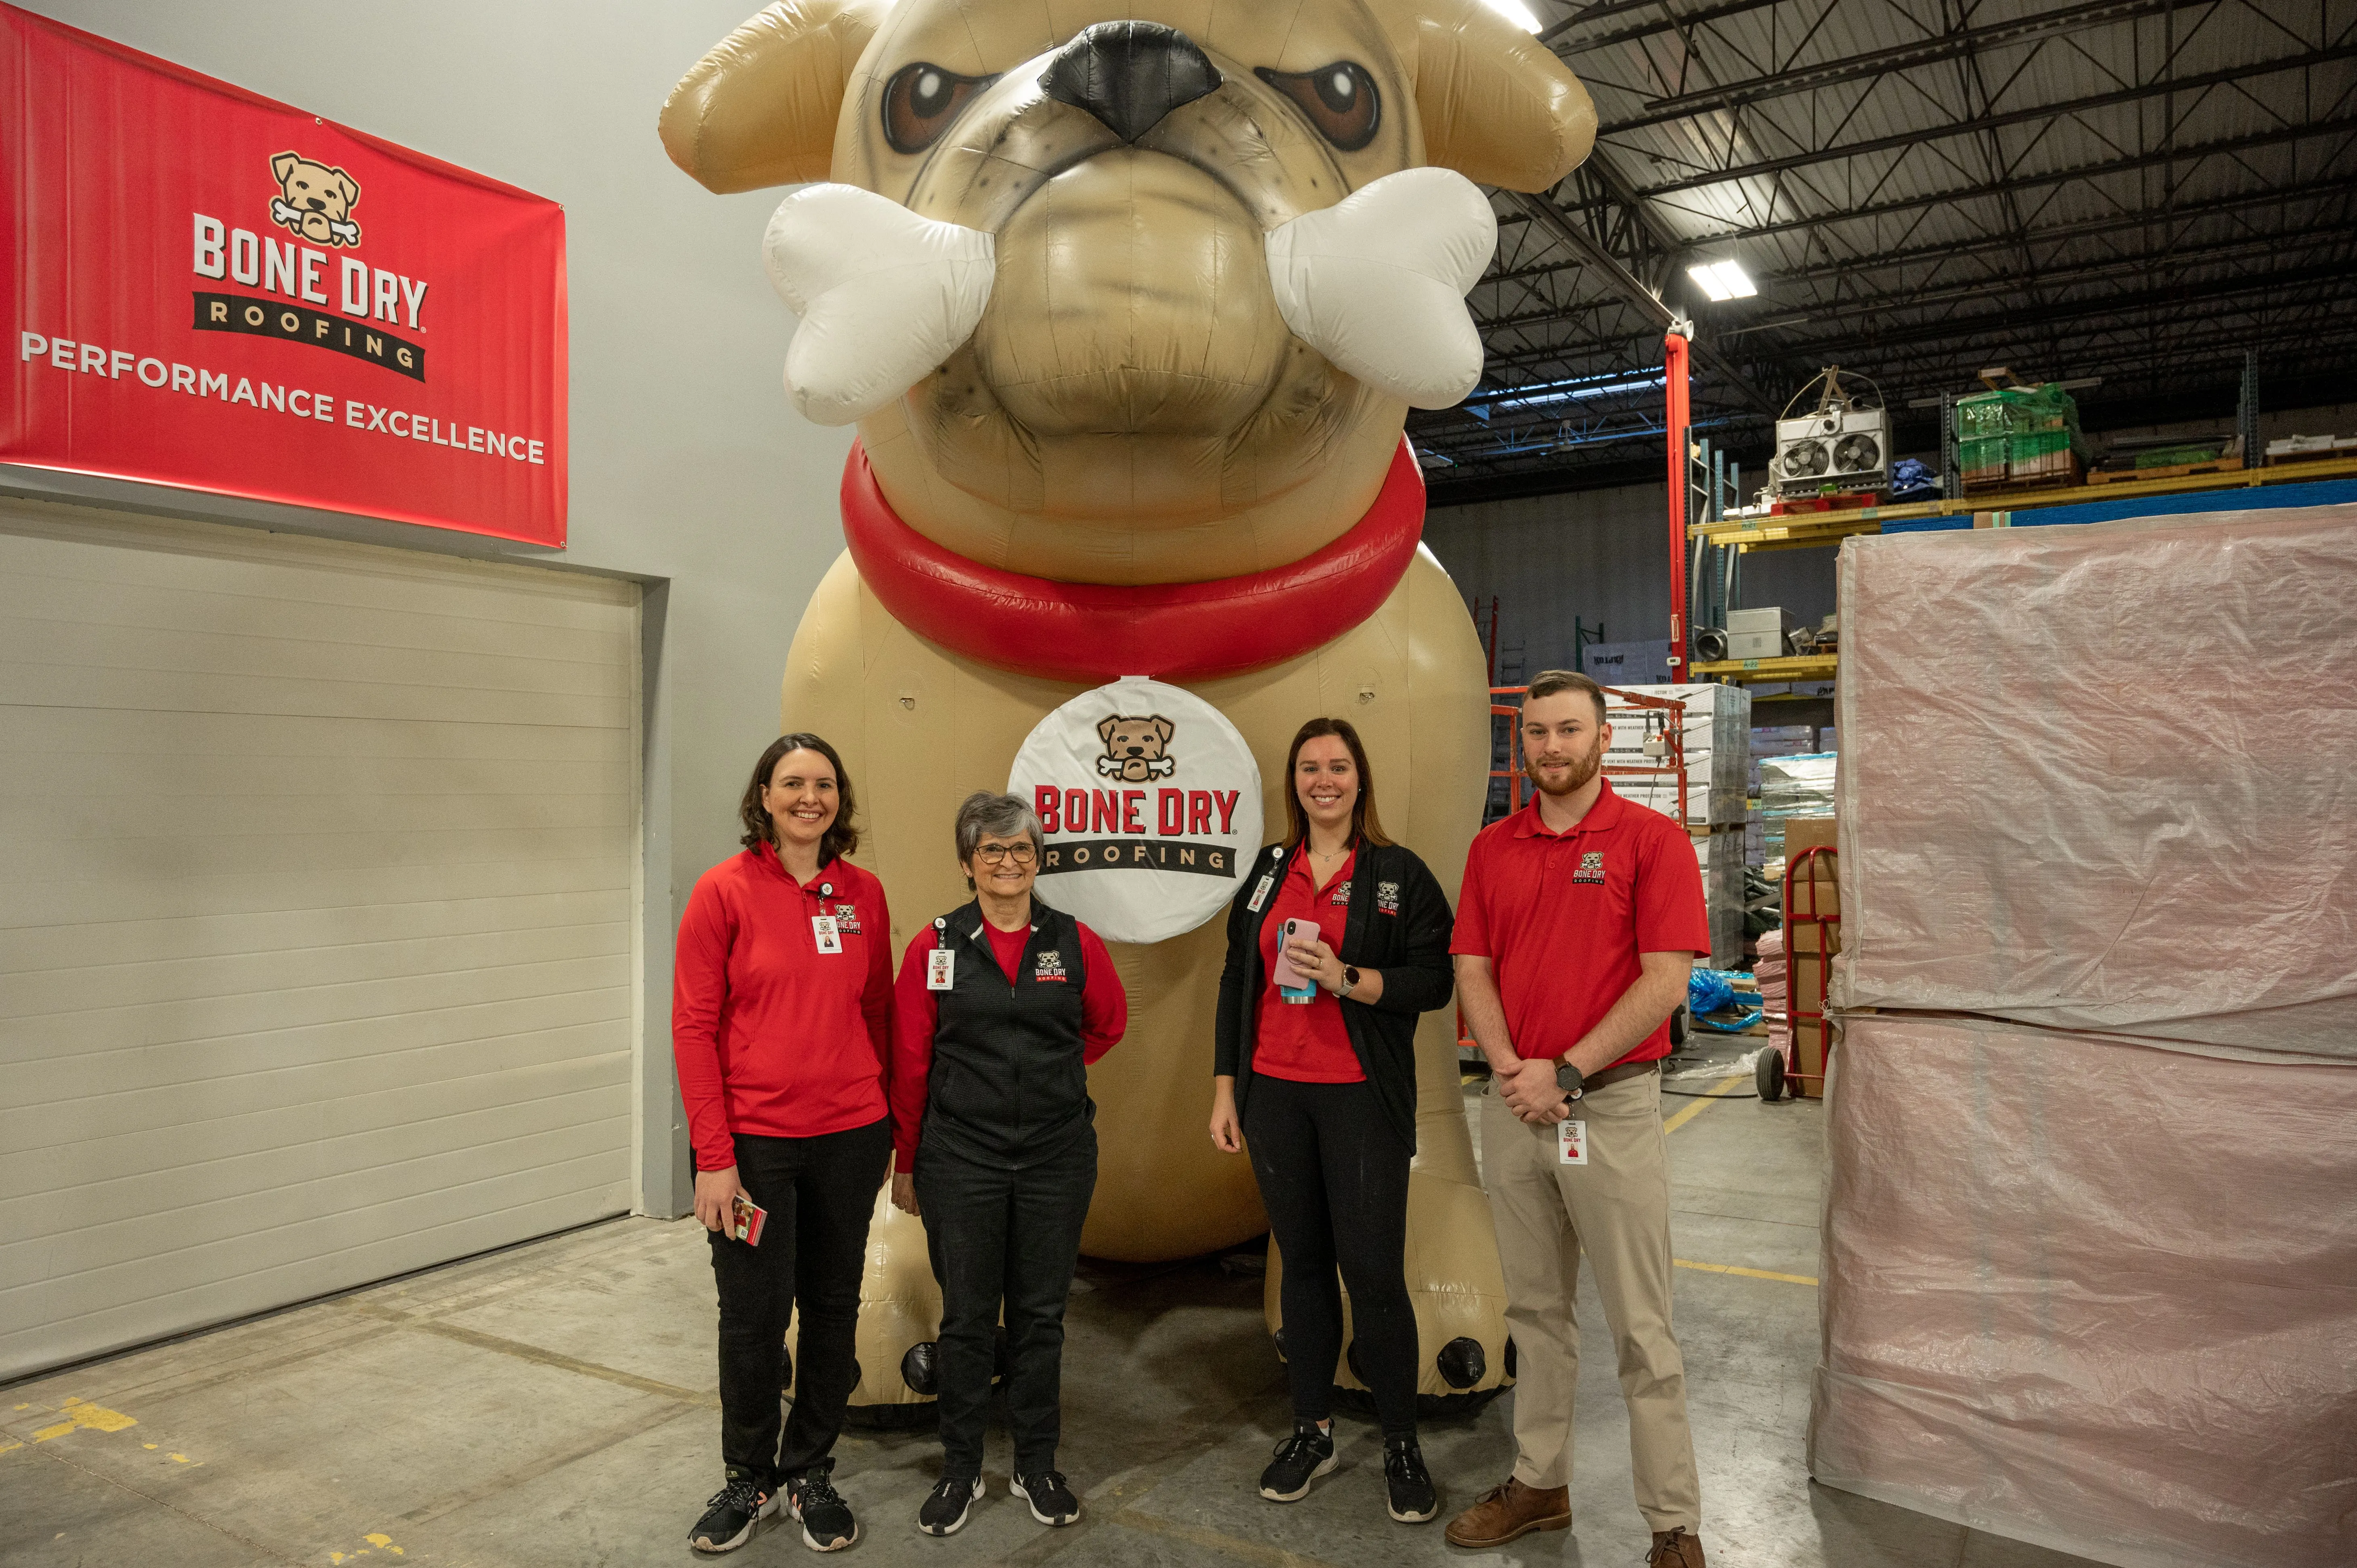 Four people standing in front of a giant inflatable bulldog mascot inside a warehouse.